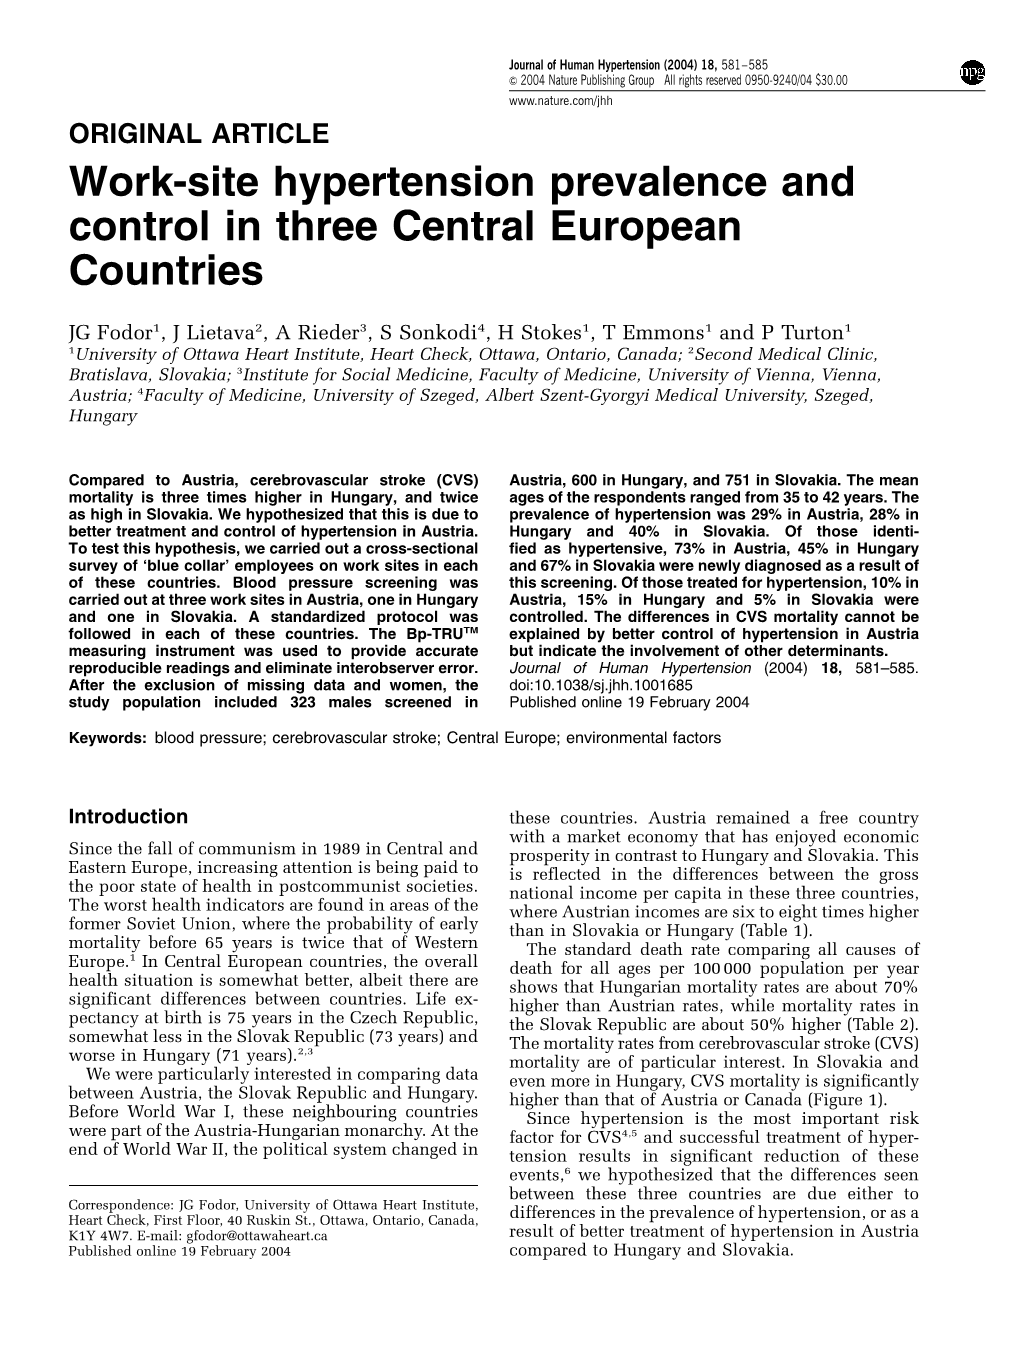 Work-Site Hypertension Prevalence and Control in Three Central European Countries